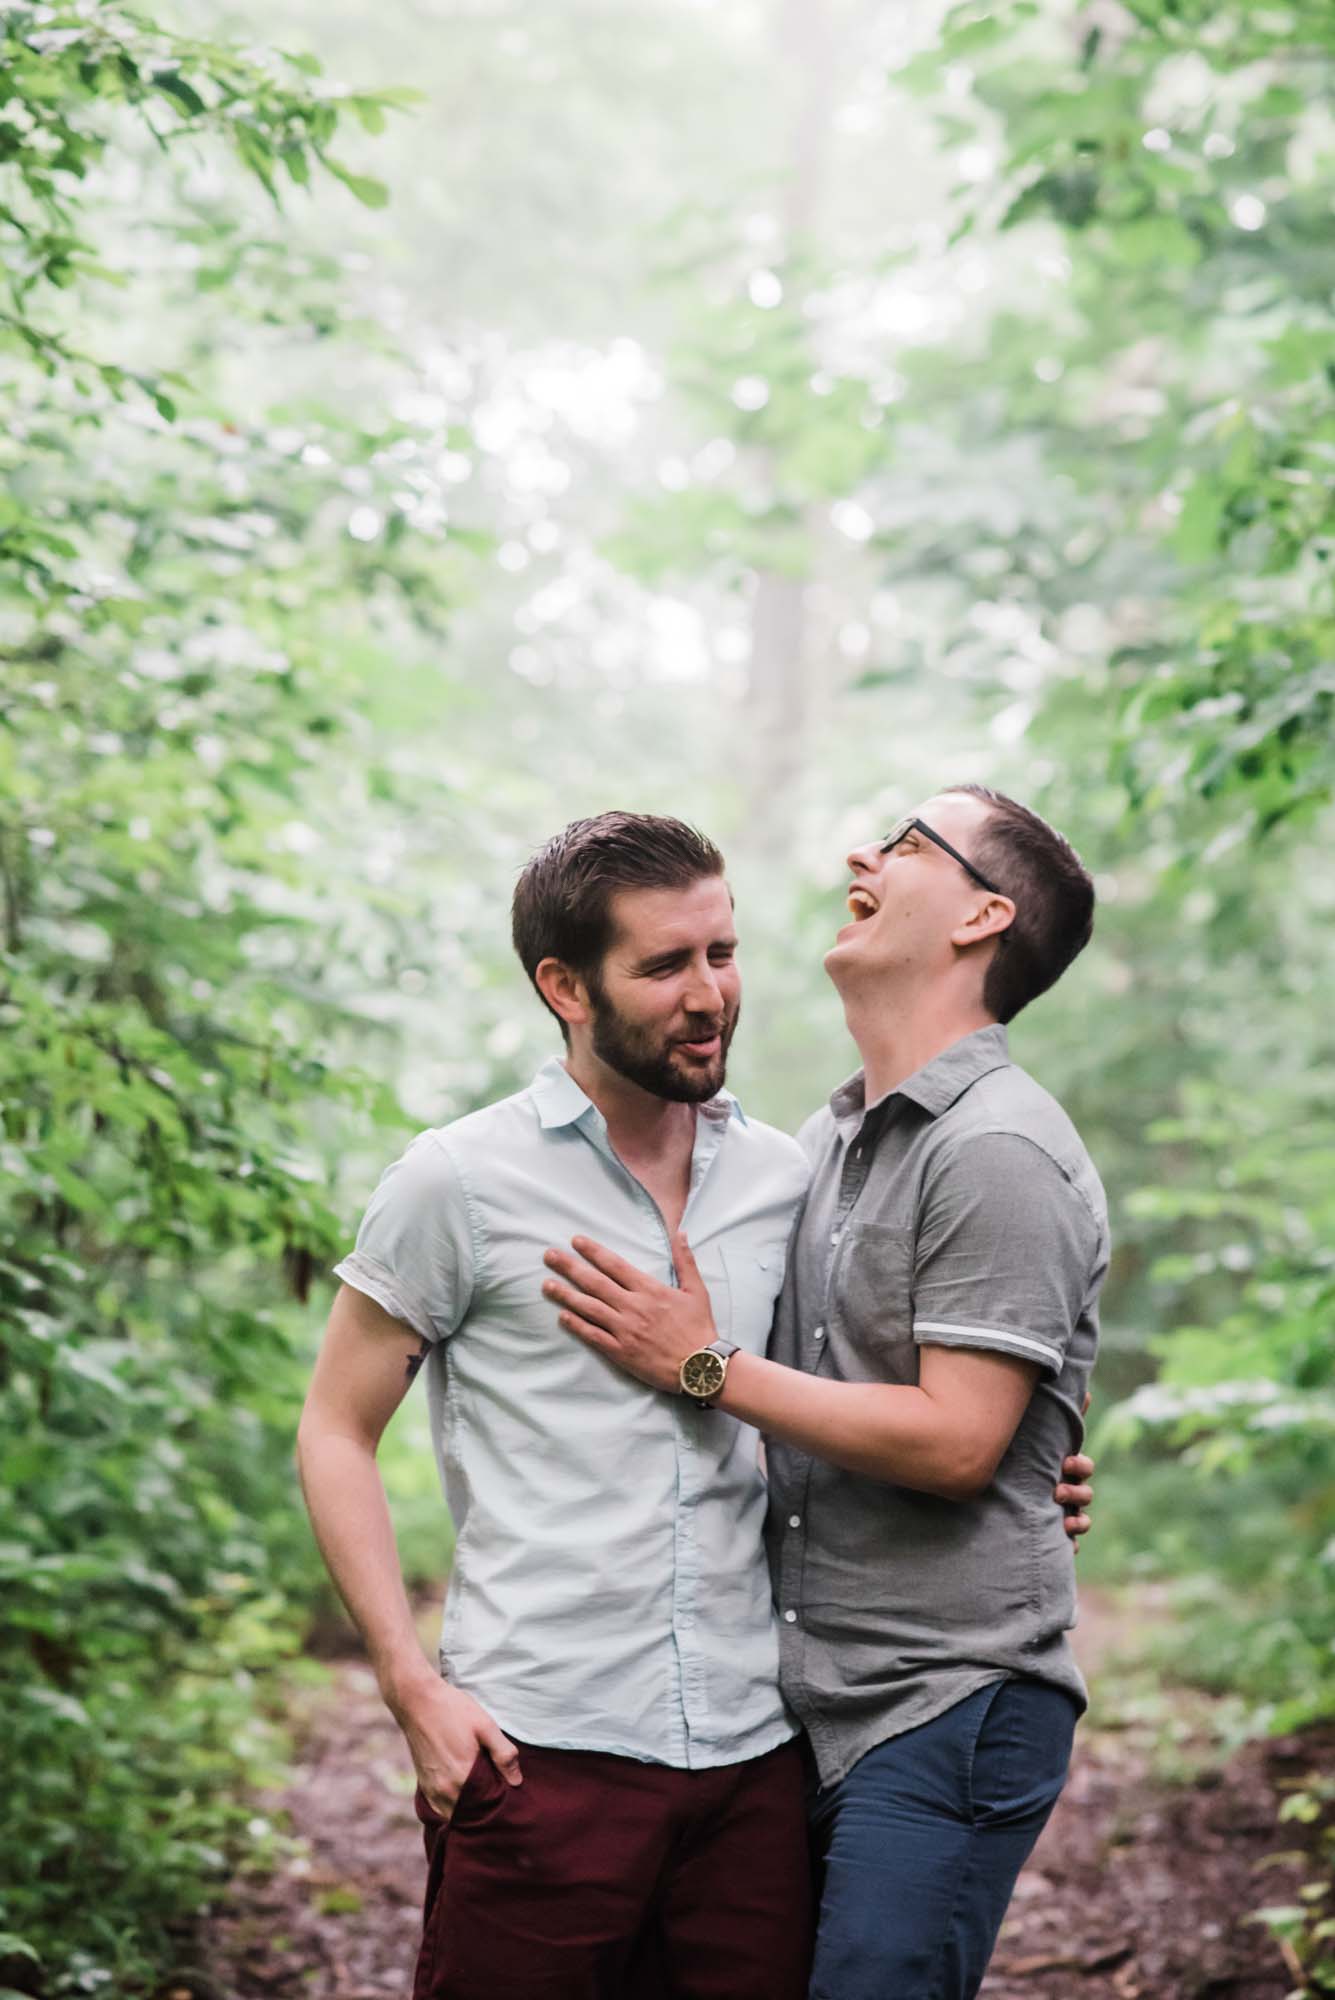 South Carolina engagement session celebrating LGBTQ+ love in the outdoors | D. Hayman Photography | Featured on Equally Wed, the leading LGBTQ+ wedding magazine